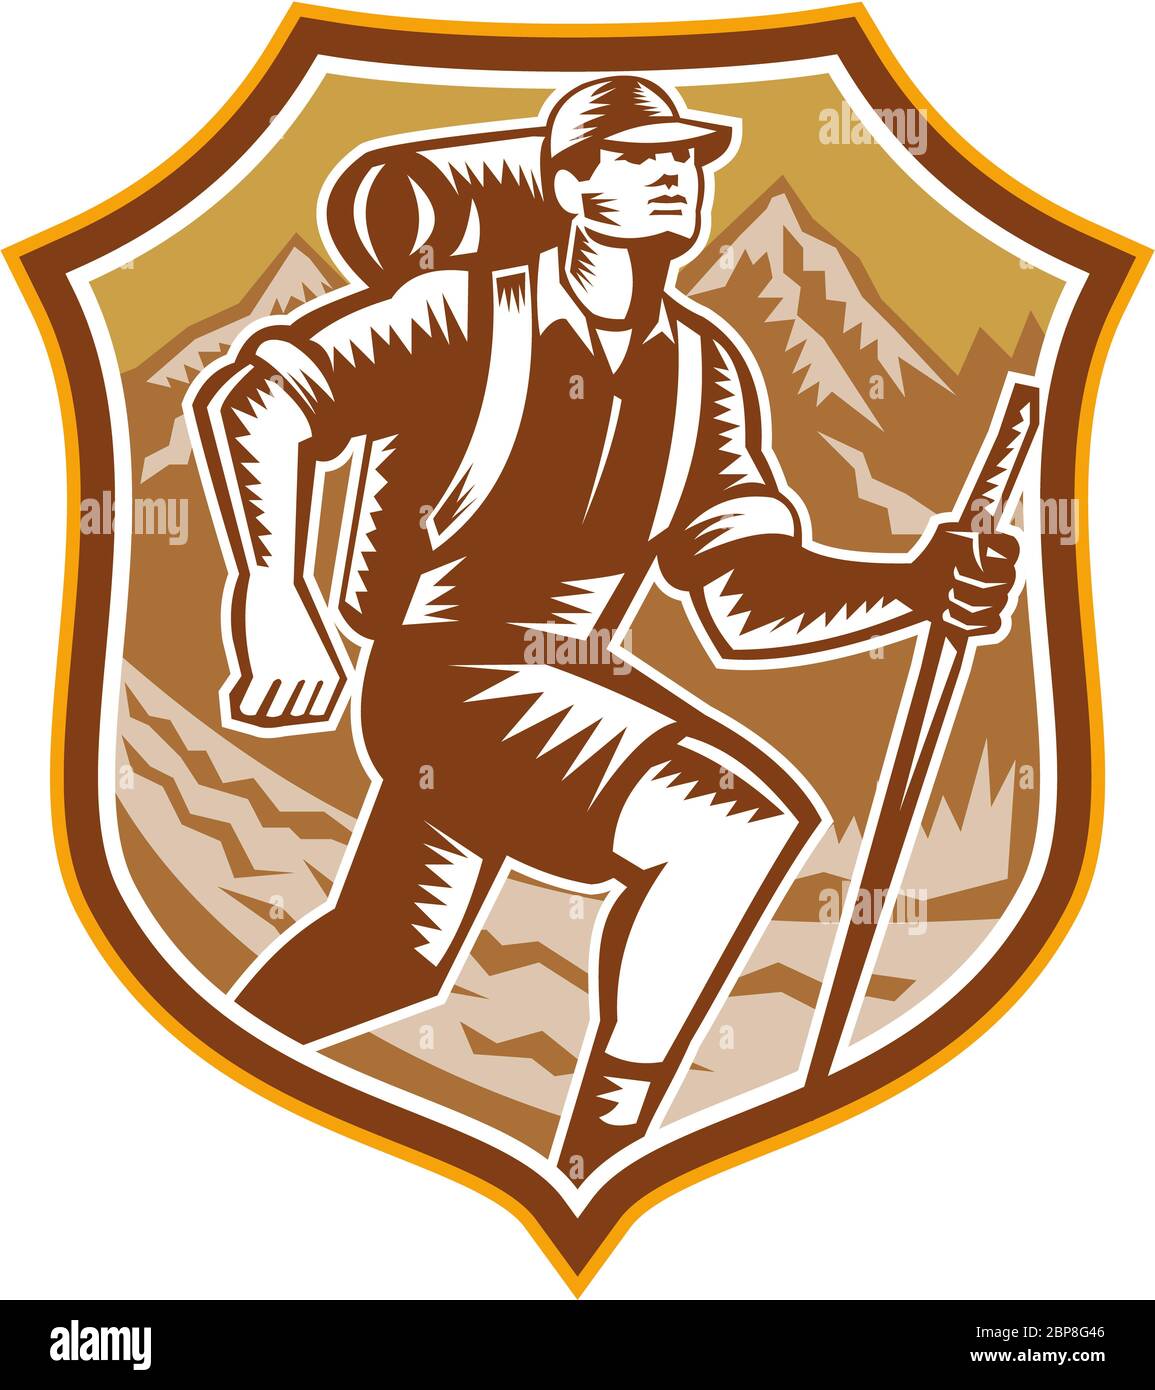 Illustration of a male hiker hiking walking holding staff with river and mountains in background set inside shield crest done in retro woodcut style. Stock Photo